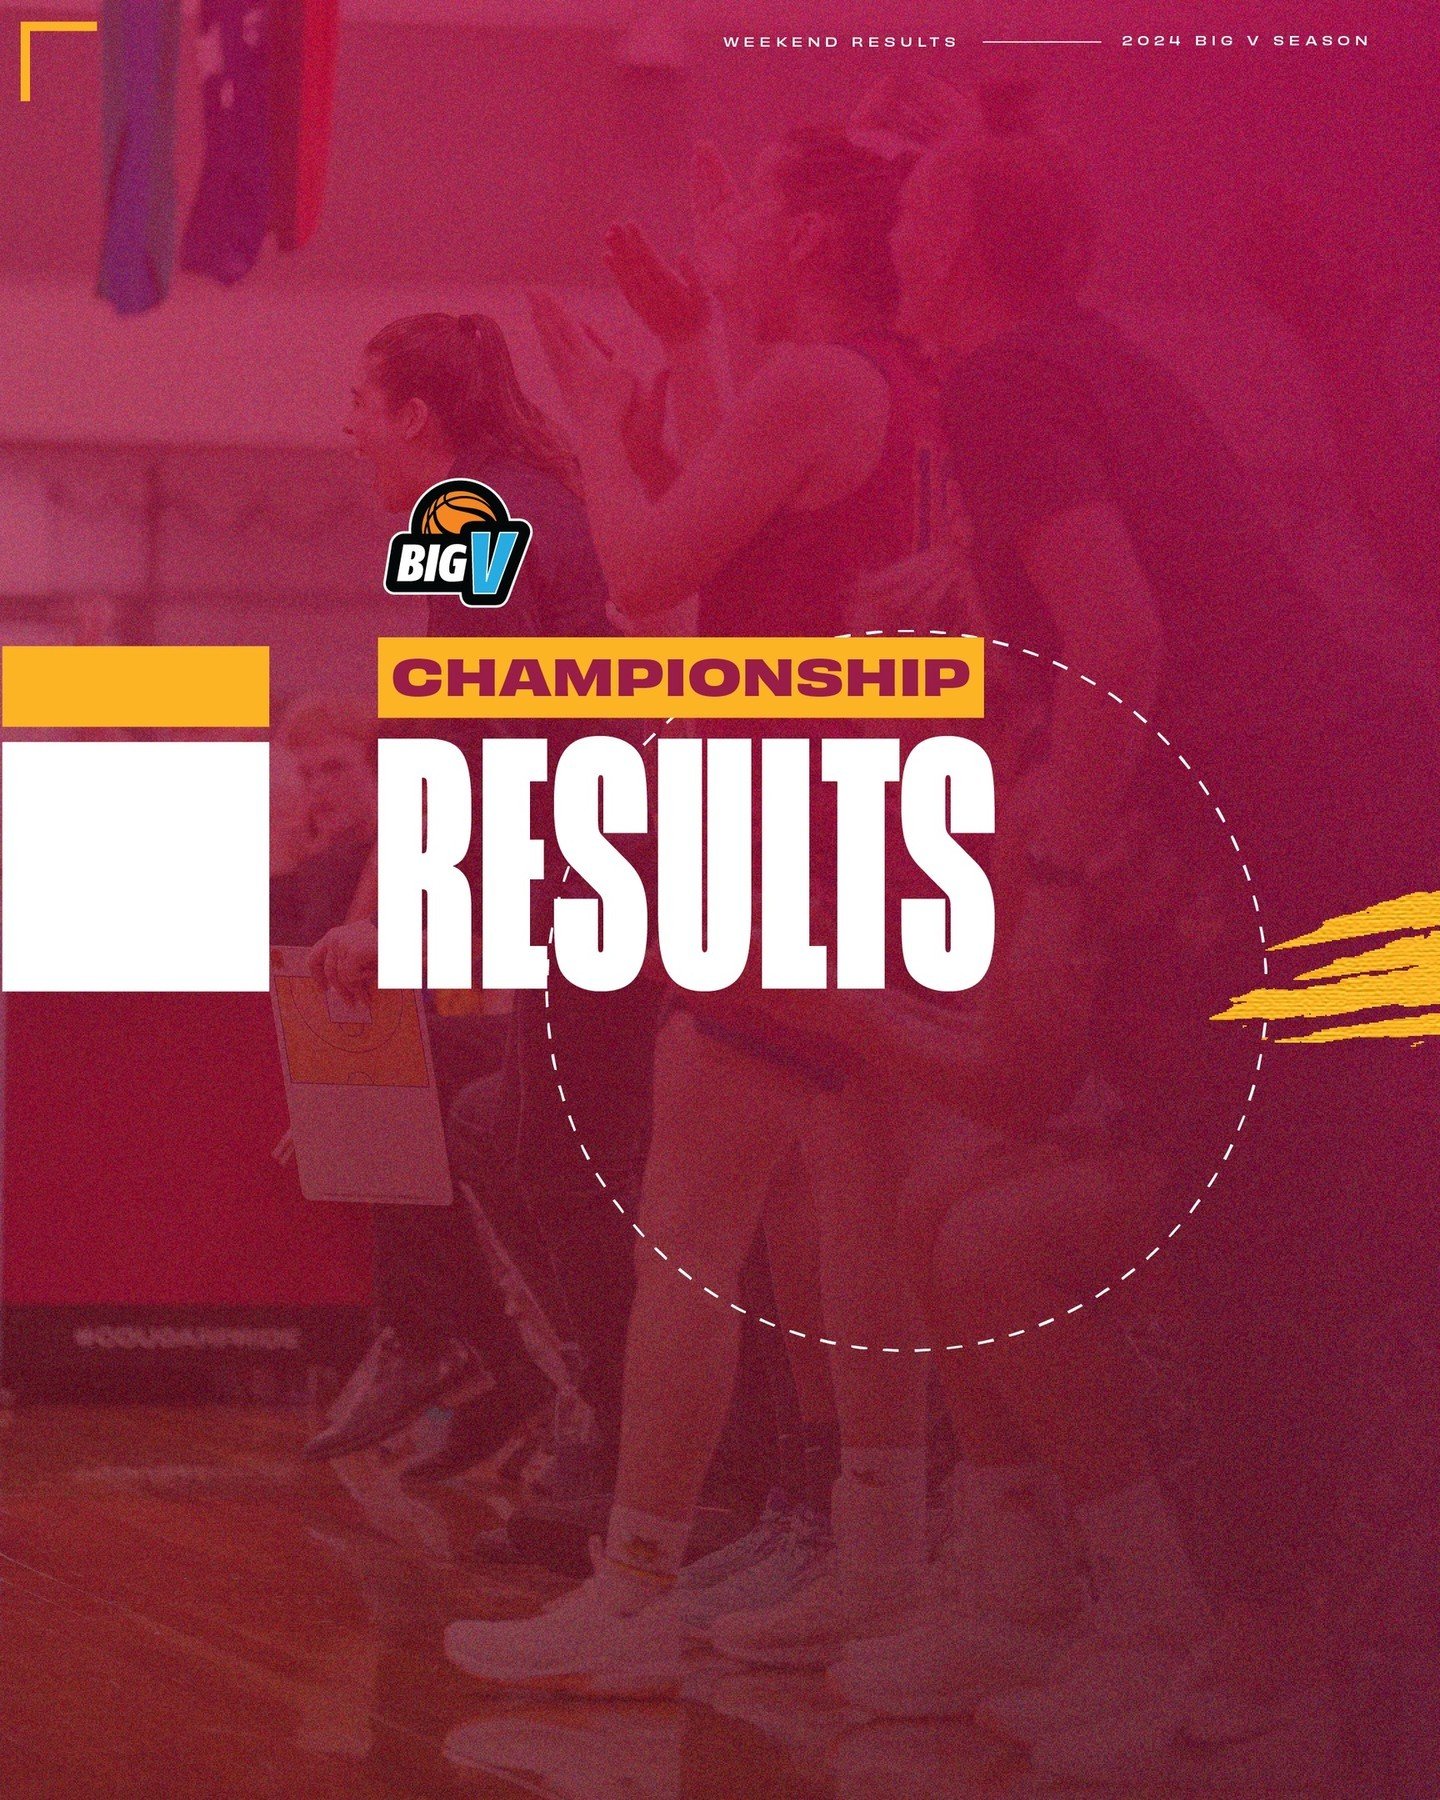 Big V Championship Results 📣⁠
⁠
Our Championship teams went 1-1 this weekend, with the Men defeating Melbourne University, and the Women dropping their game against the Mermaids.⁠
⁠
@bigv_ball⁠
⁠
#CougarPride⁠
#MakeThemPrey